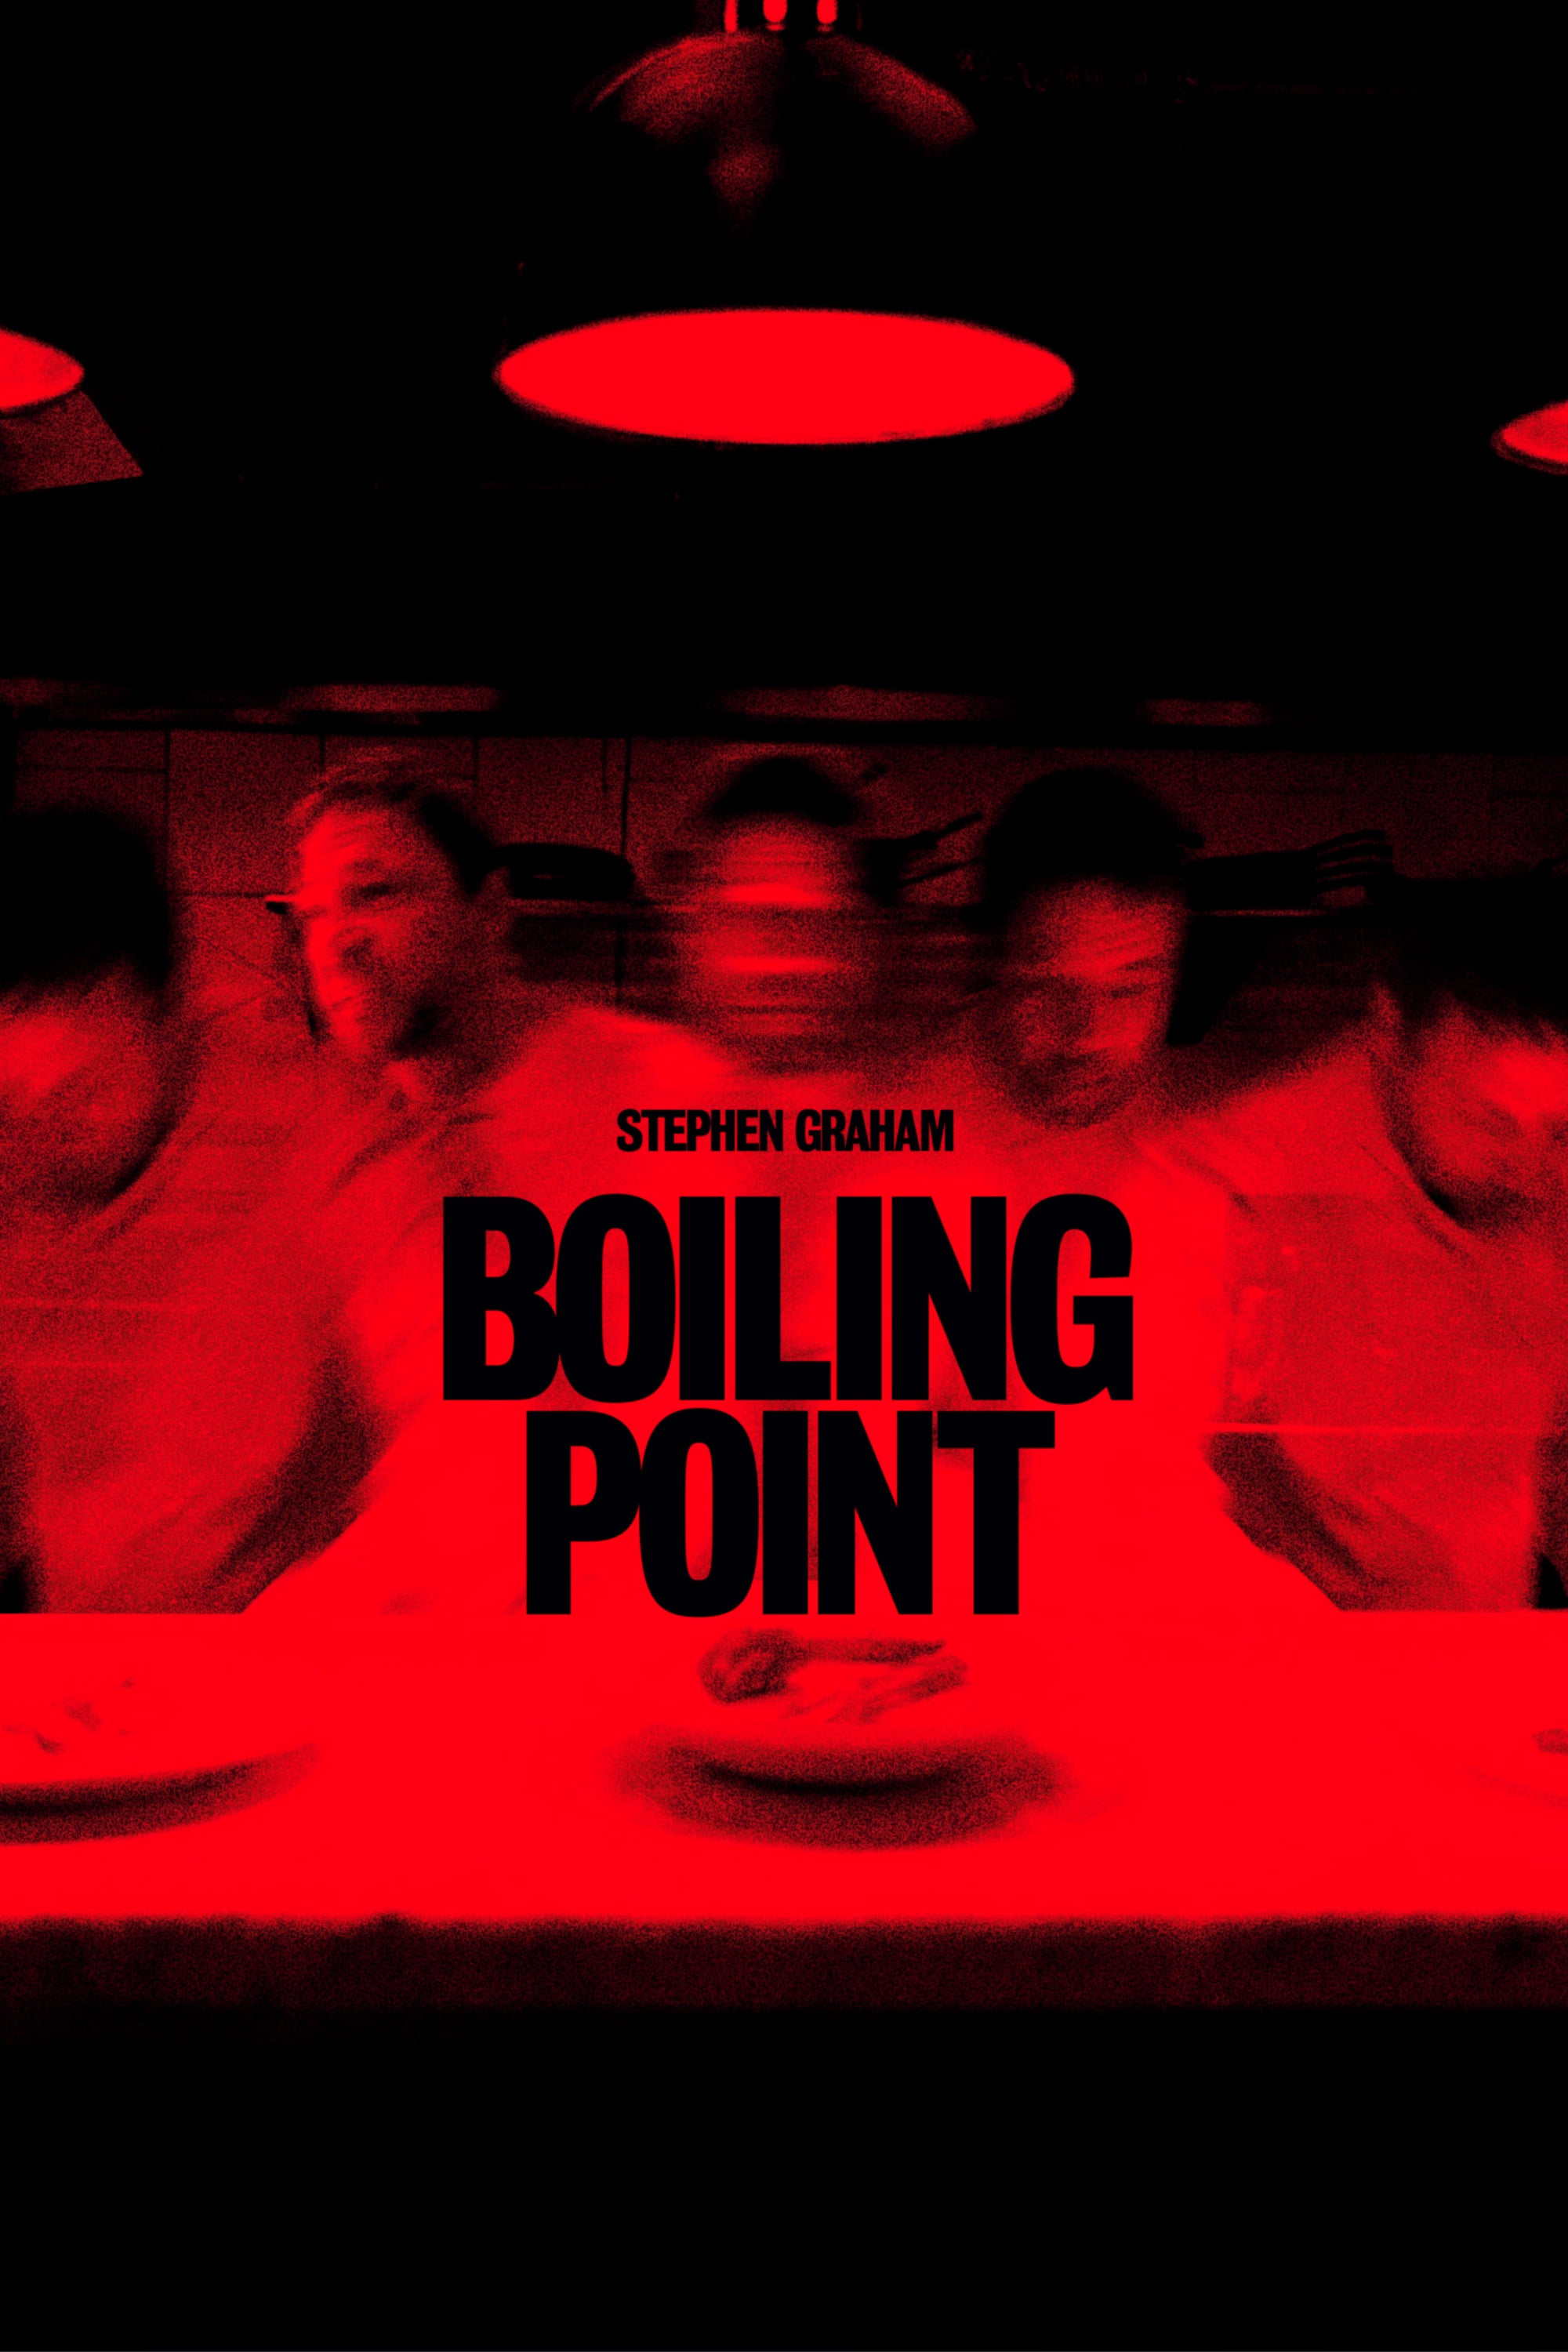 Boiling Point (2021)